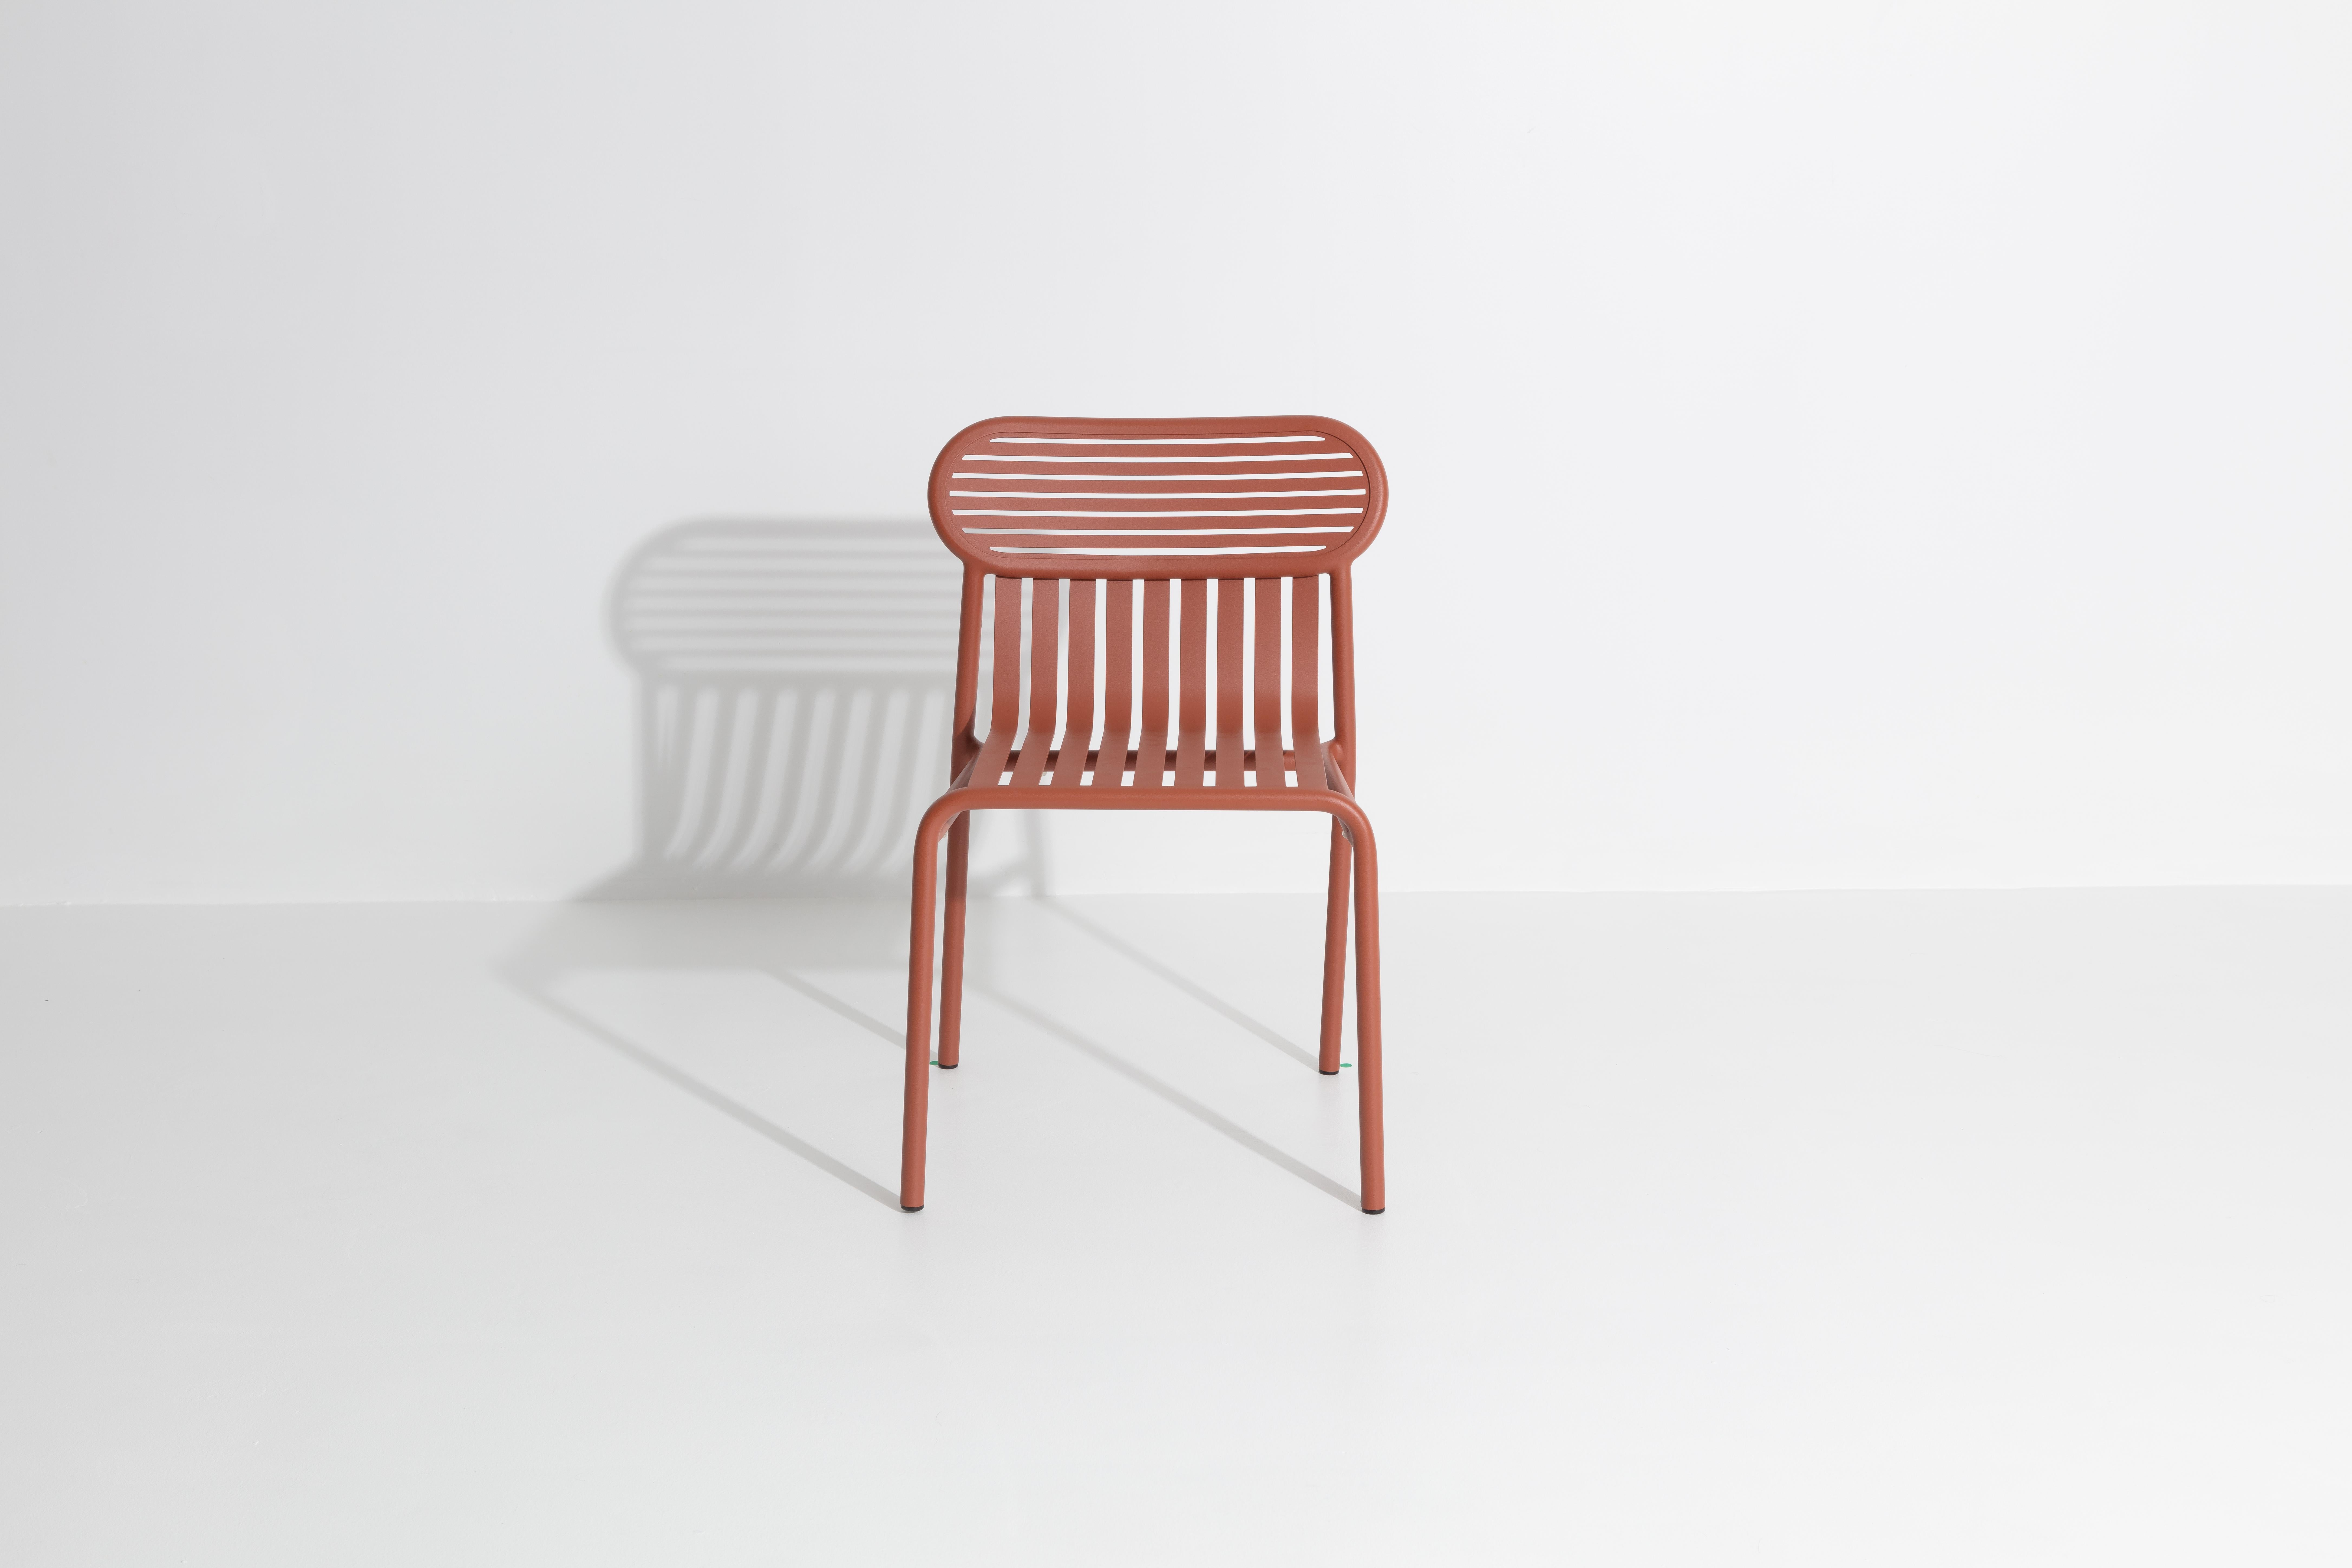 Petite Friture Week-End Chair in Terracotta Aluminium by Studio BrichetZiegler, 2017

The week-end collection is a full range of outdoor furniture, in aluminium grained epoxy paint, matt finish, that includes 18 functions and 8 colours for the